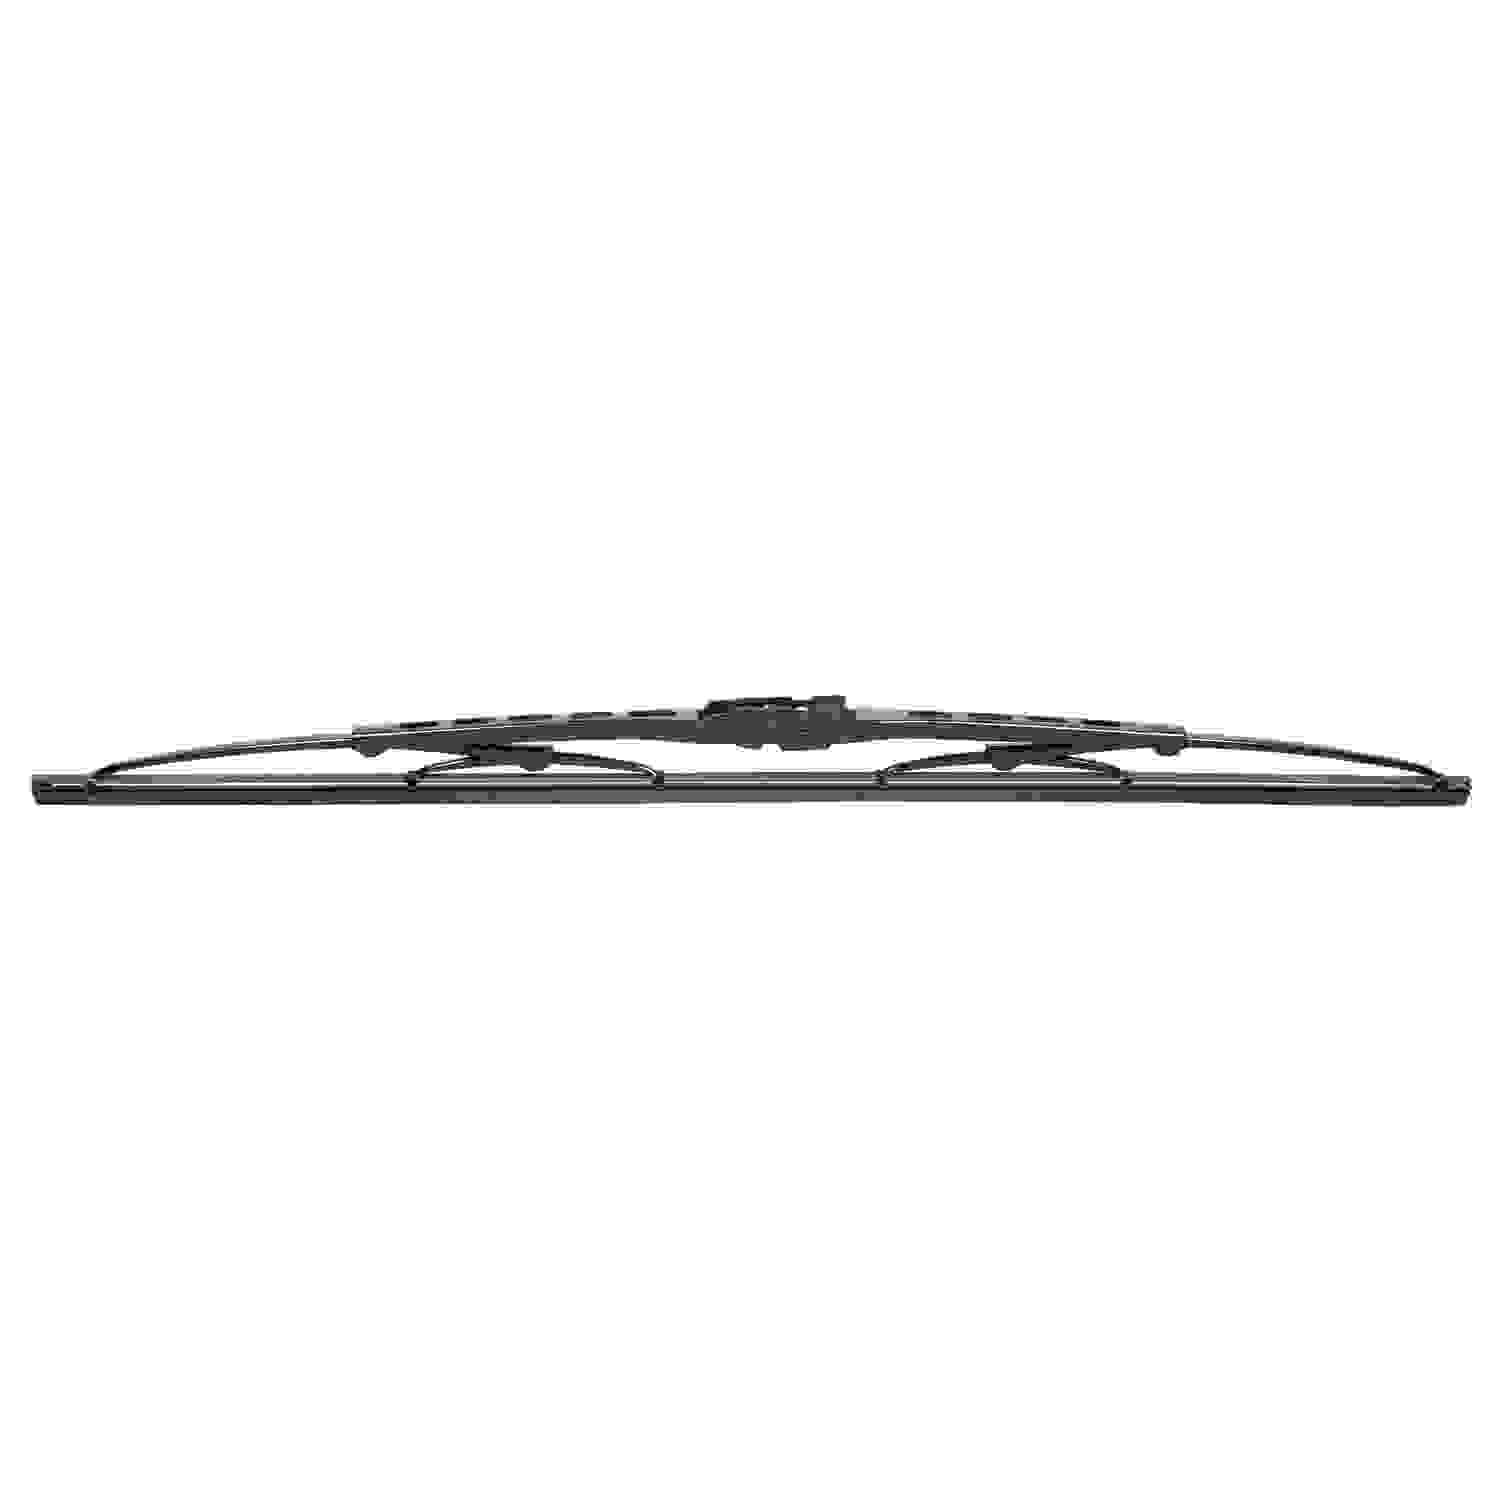 ANCO WIPER PRODUCTS - 97-Series Wiper Blade (Front) - ANC 97-18